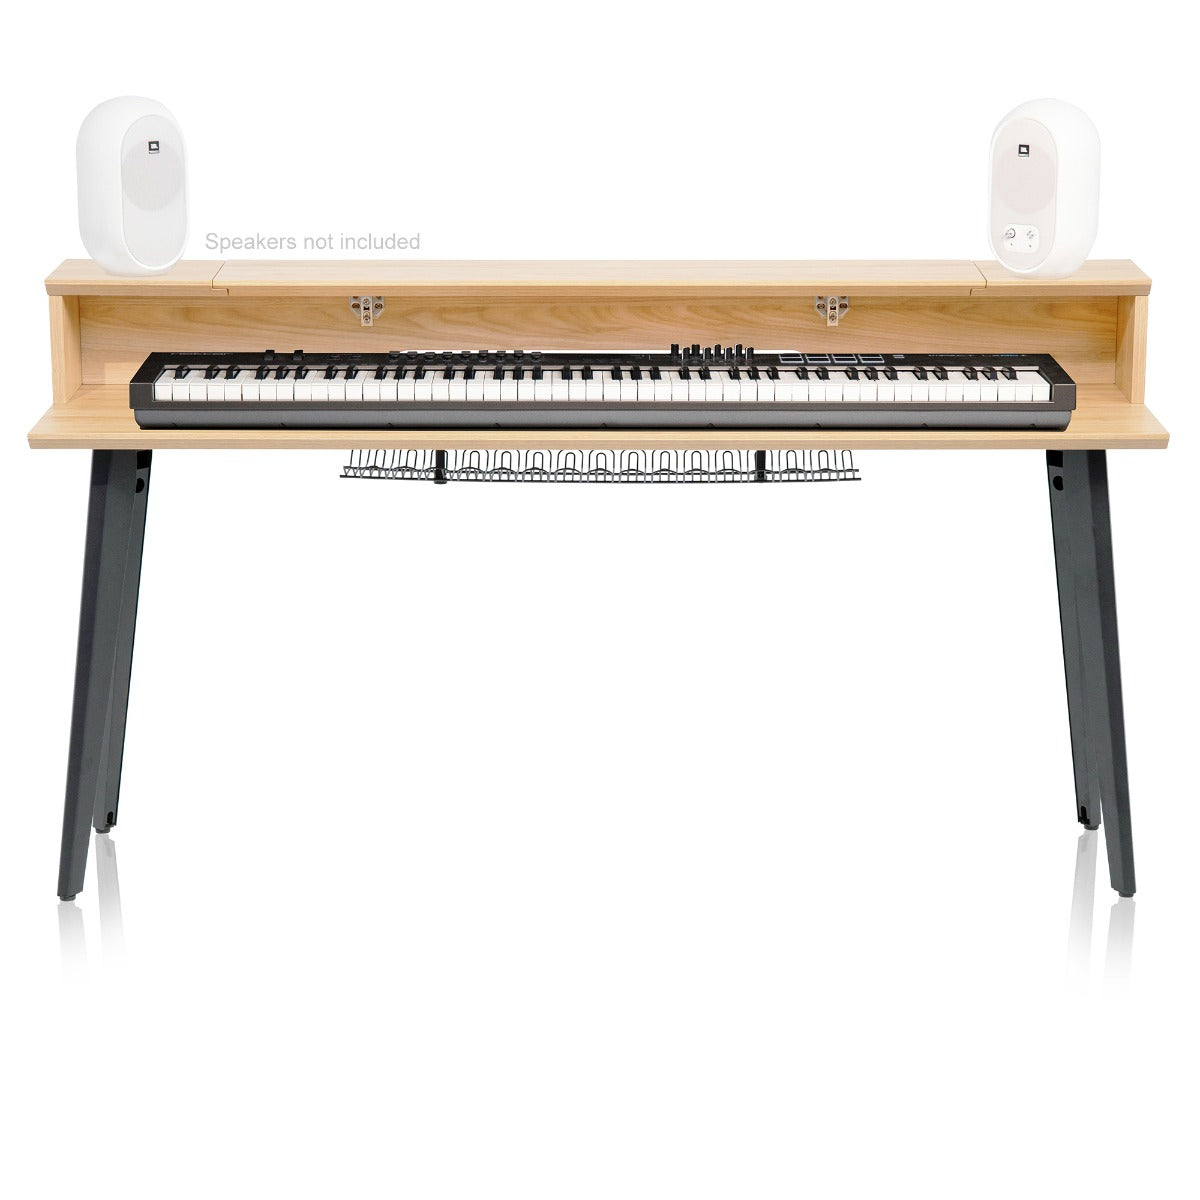 Front image of the Gator Frameworks Elite Series Keyboard Furniture 88 Note - Maple with a keyboard and speakers on it